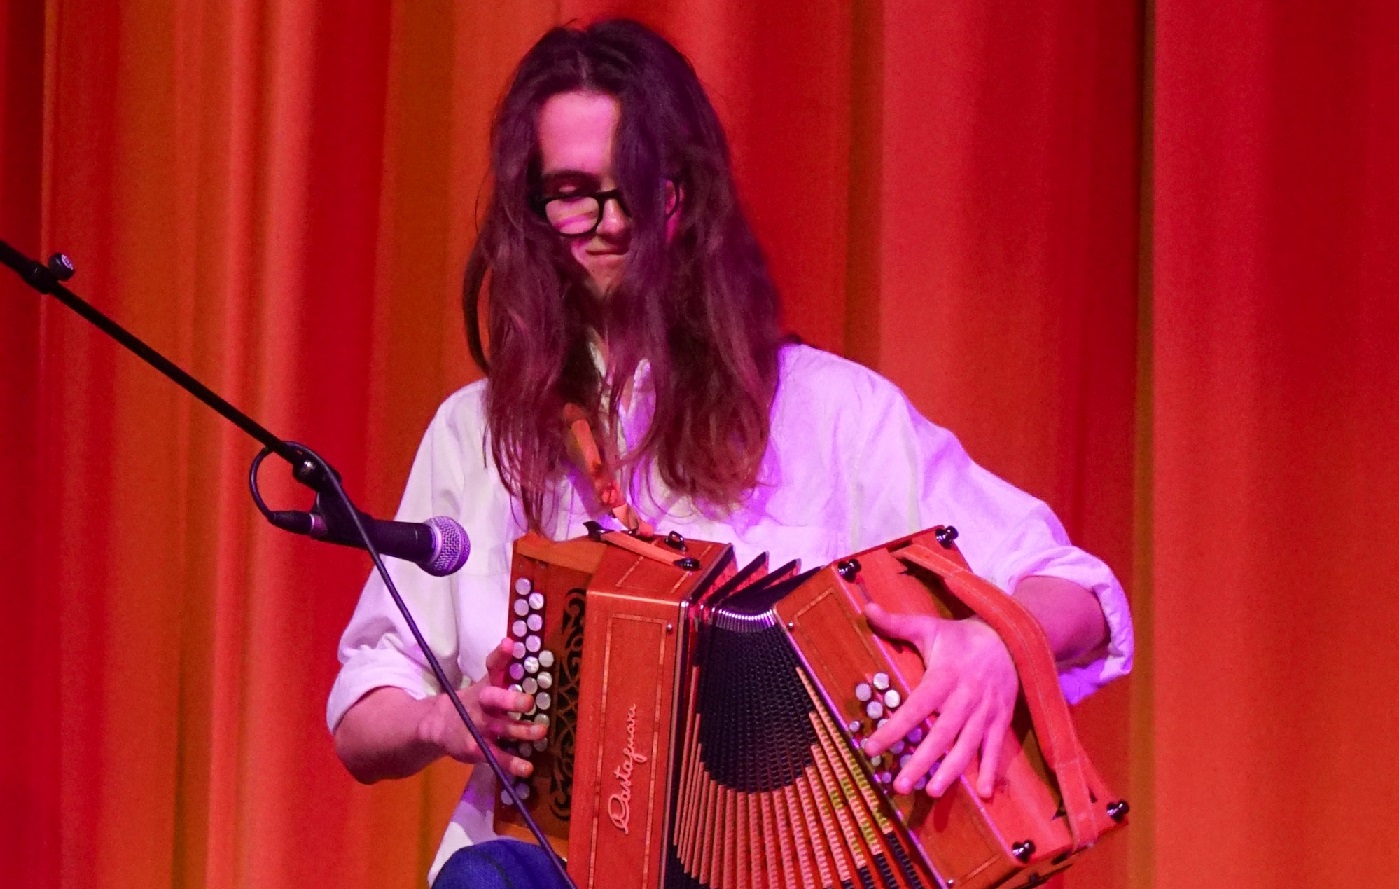 a young man in his early 20s with long brown hair smiling playin an accordion sitting down in front of an orange curtain